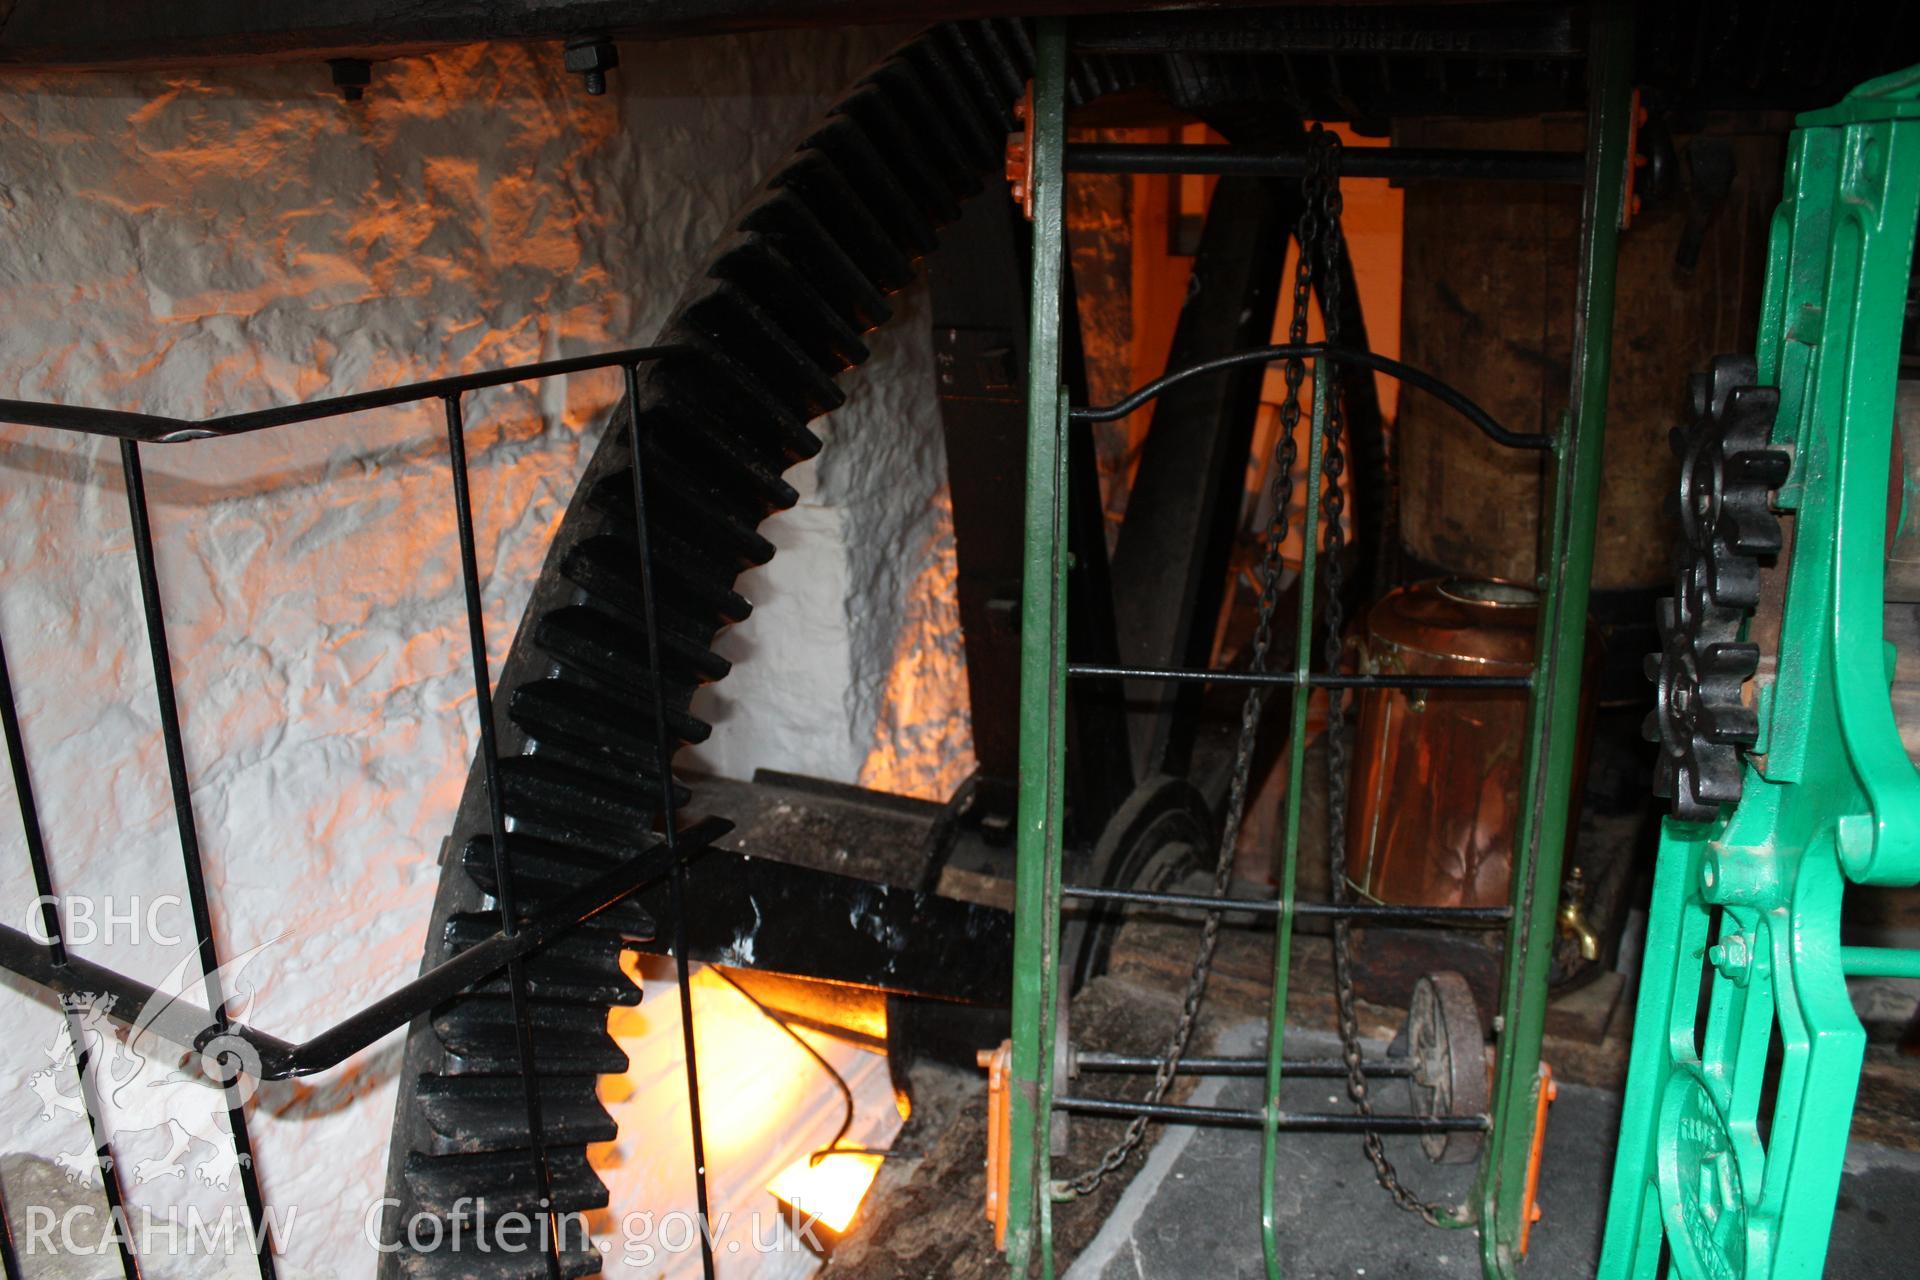 Colour photograph showing iron machinery at Brookhouse Mill, Denbigh, Photograpraphed during survey conducted by Geoff Ward circa 2010.